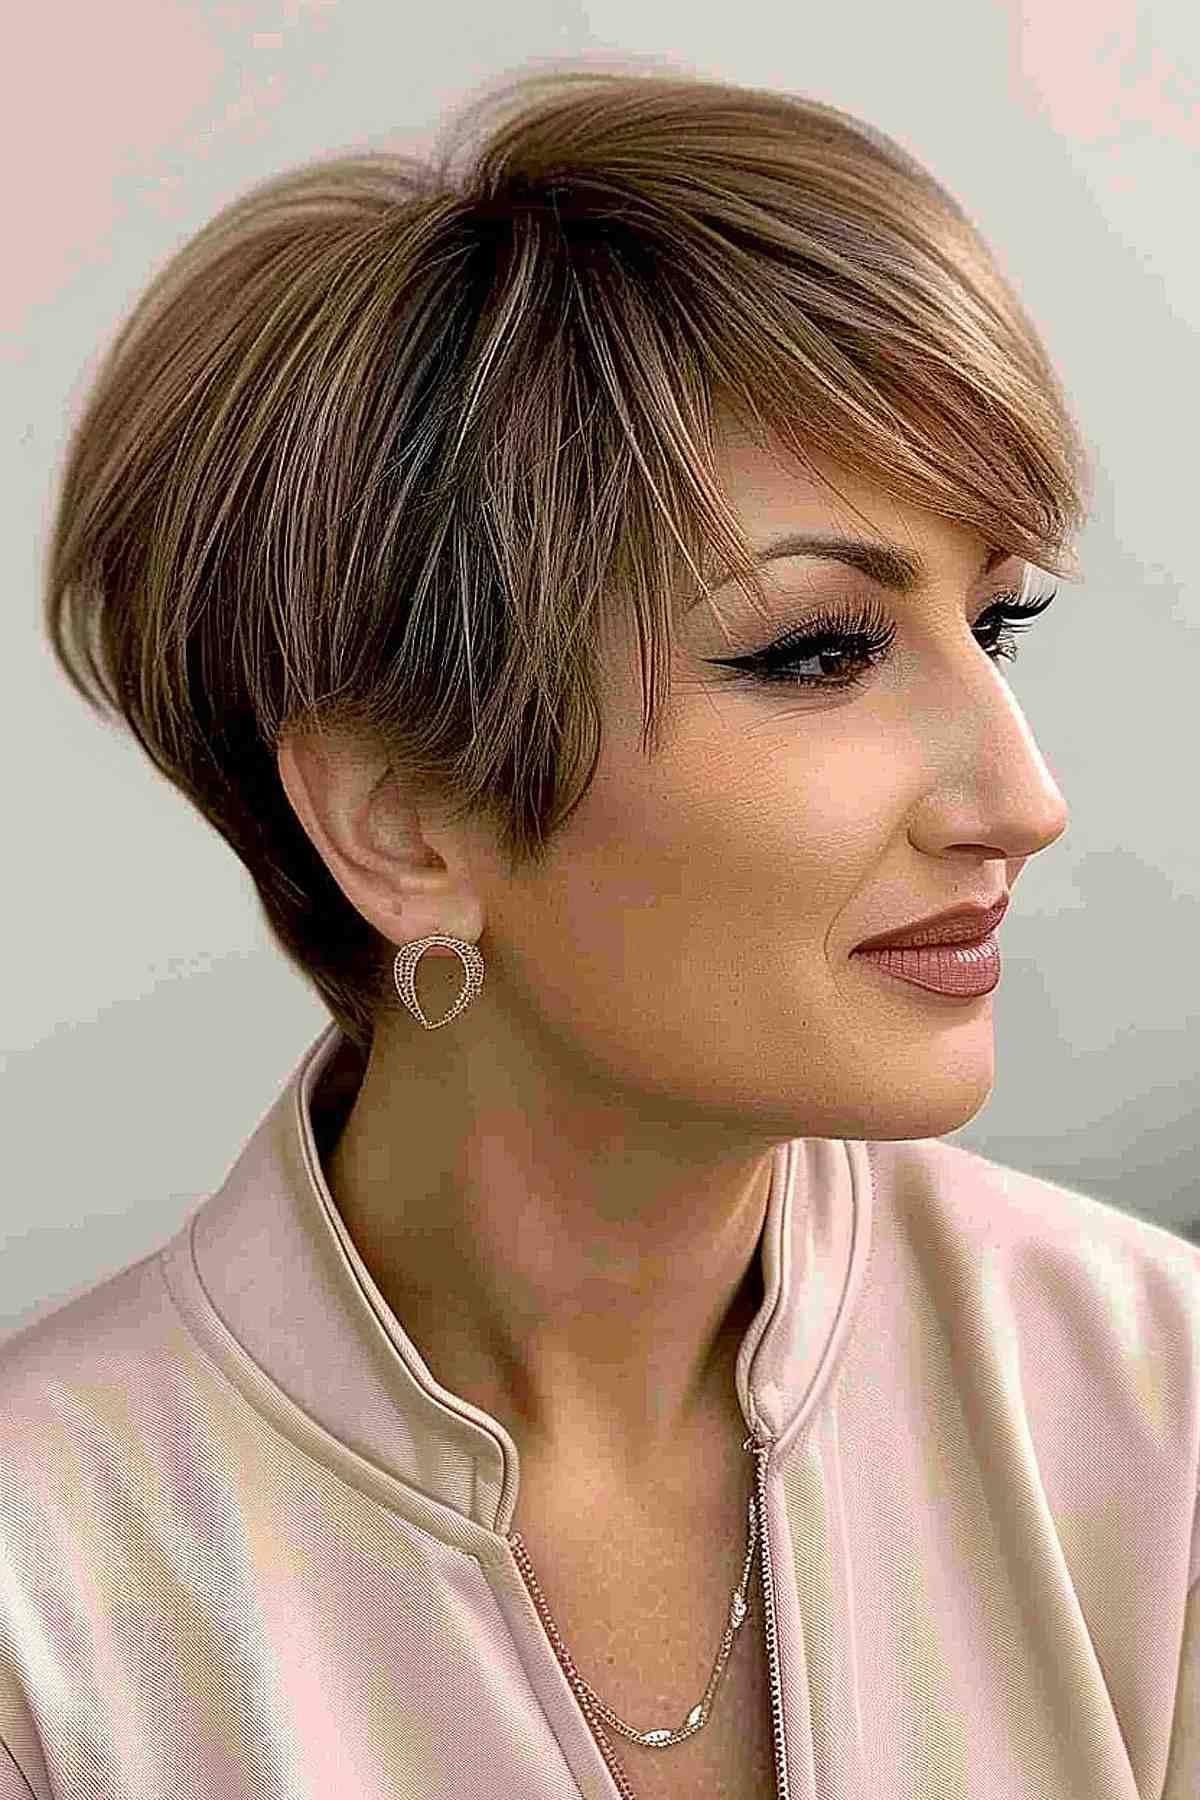 Elegant woman with a stylish mushroom brown pixie cut, featuring precision styling and subtle highlights for added depth.